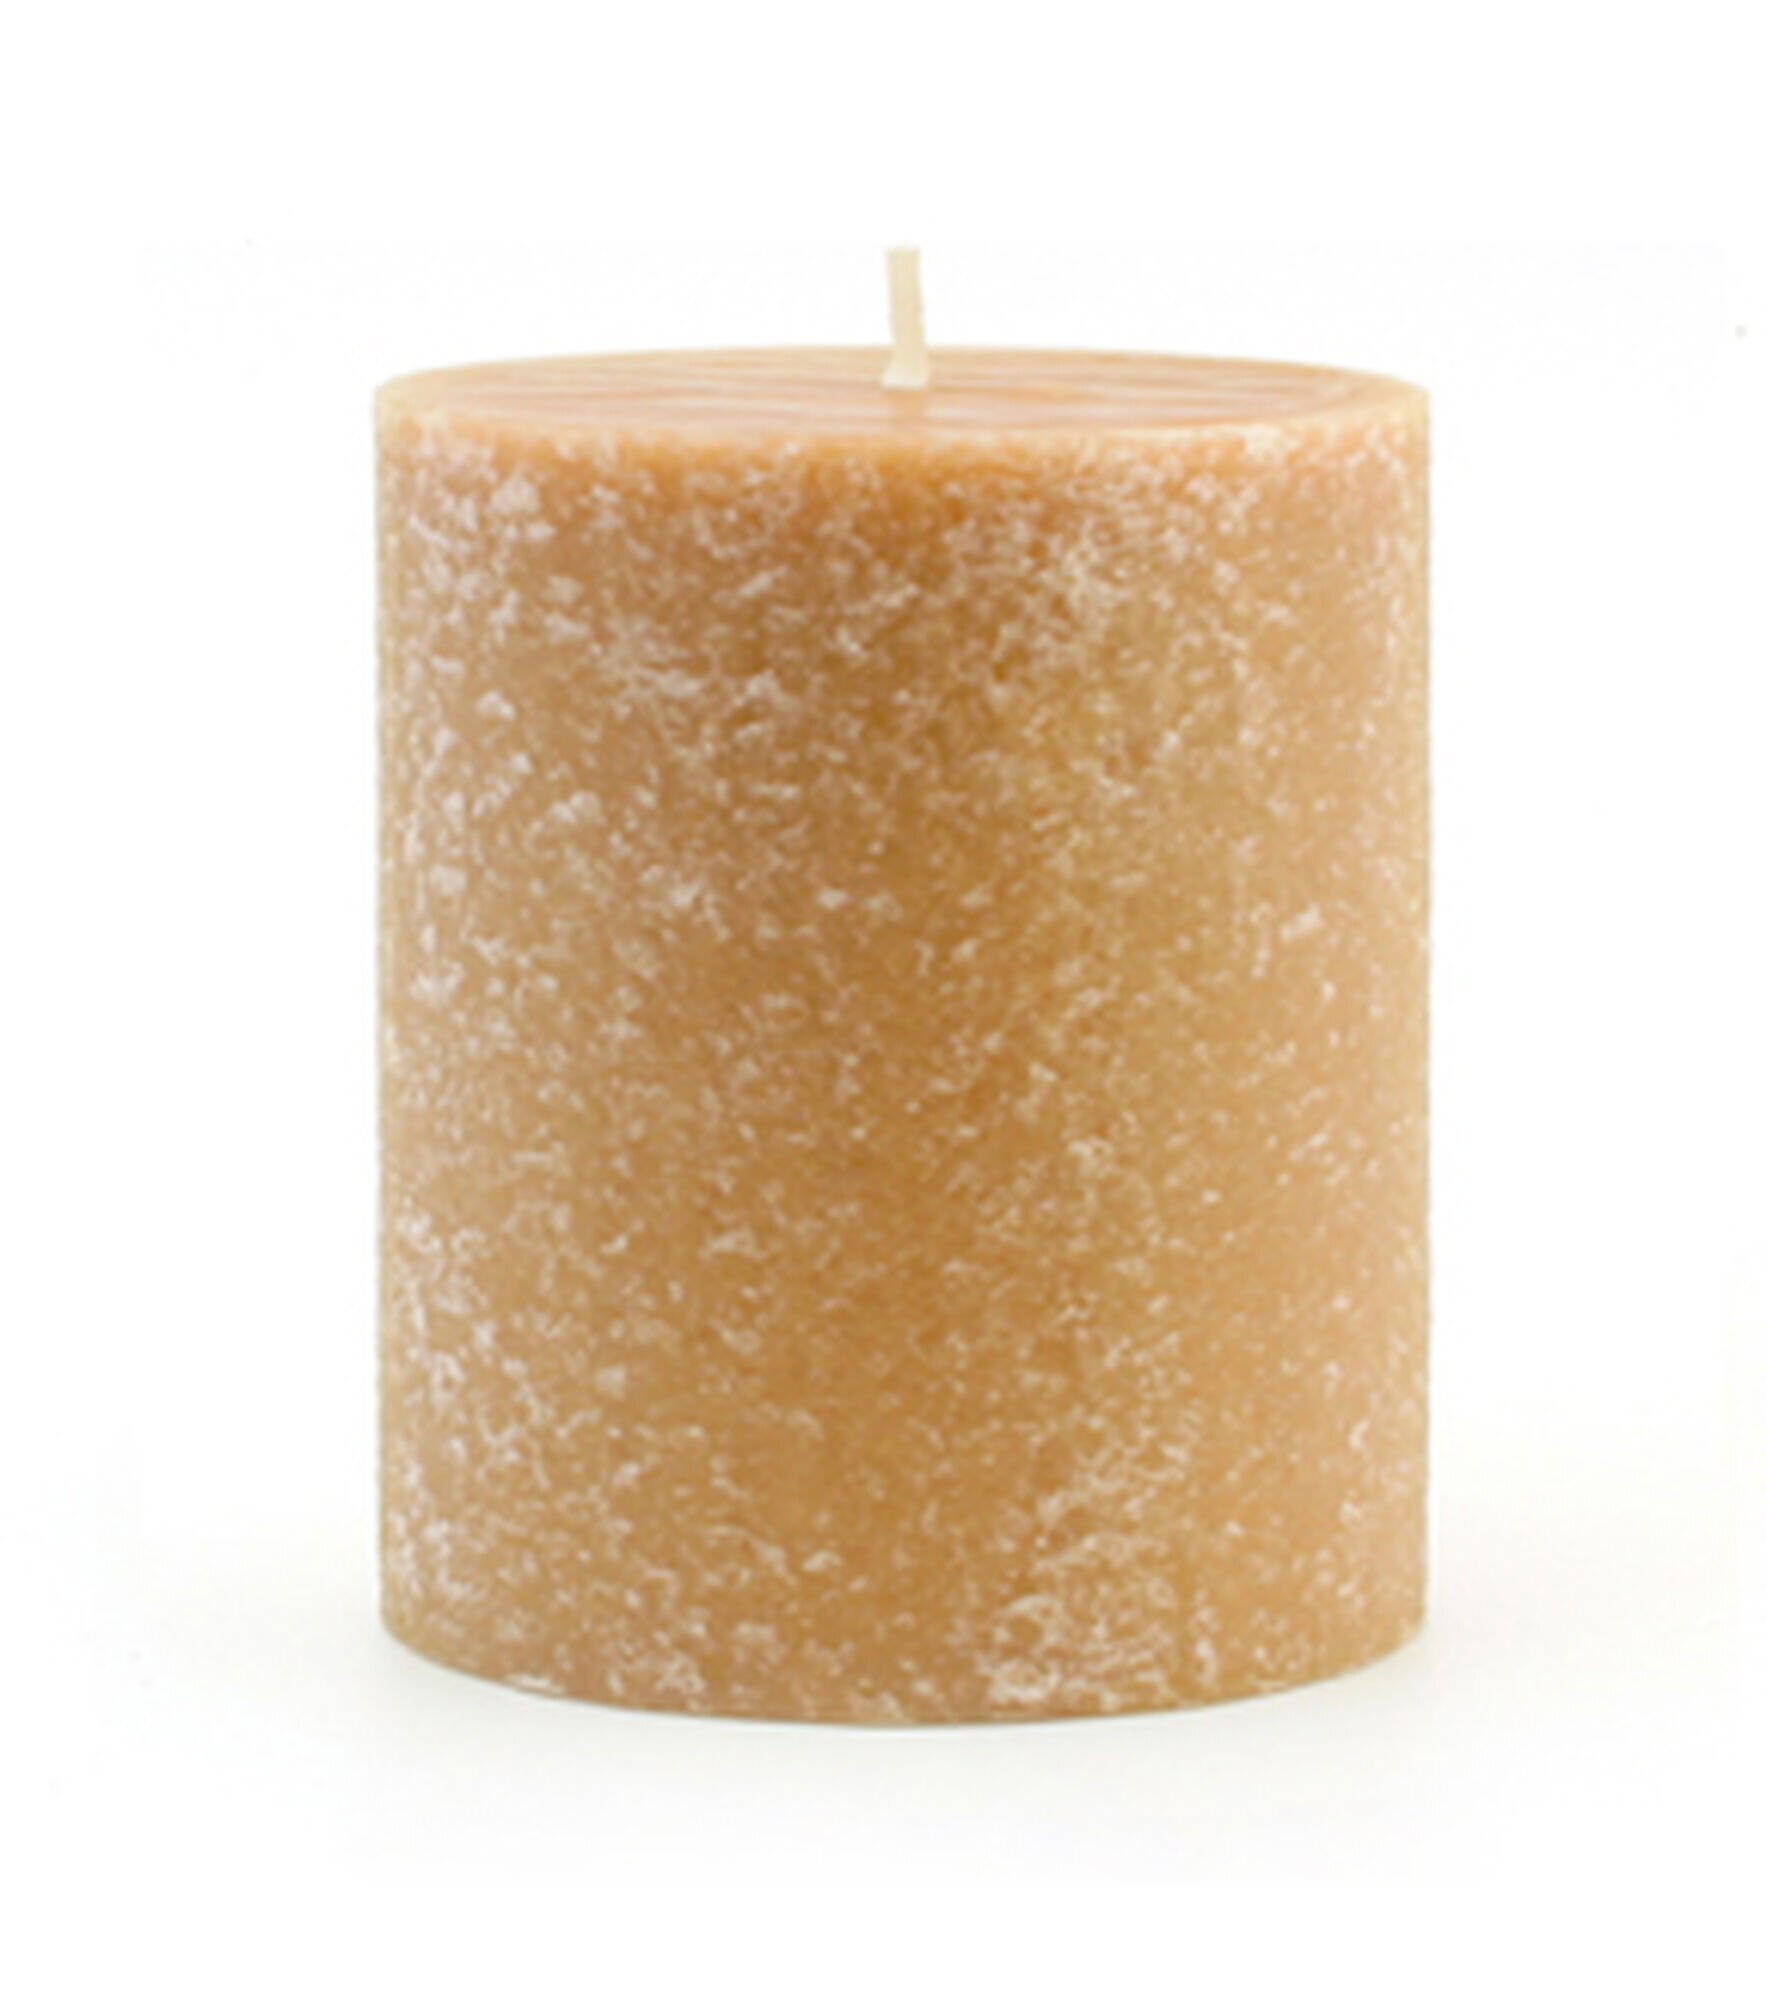 ROOT Candles 4 x 4 Unscented Timberline Pillar Candle 1pk